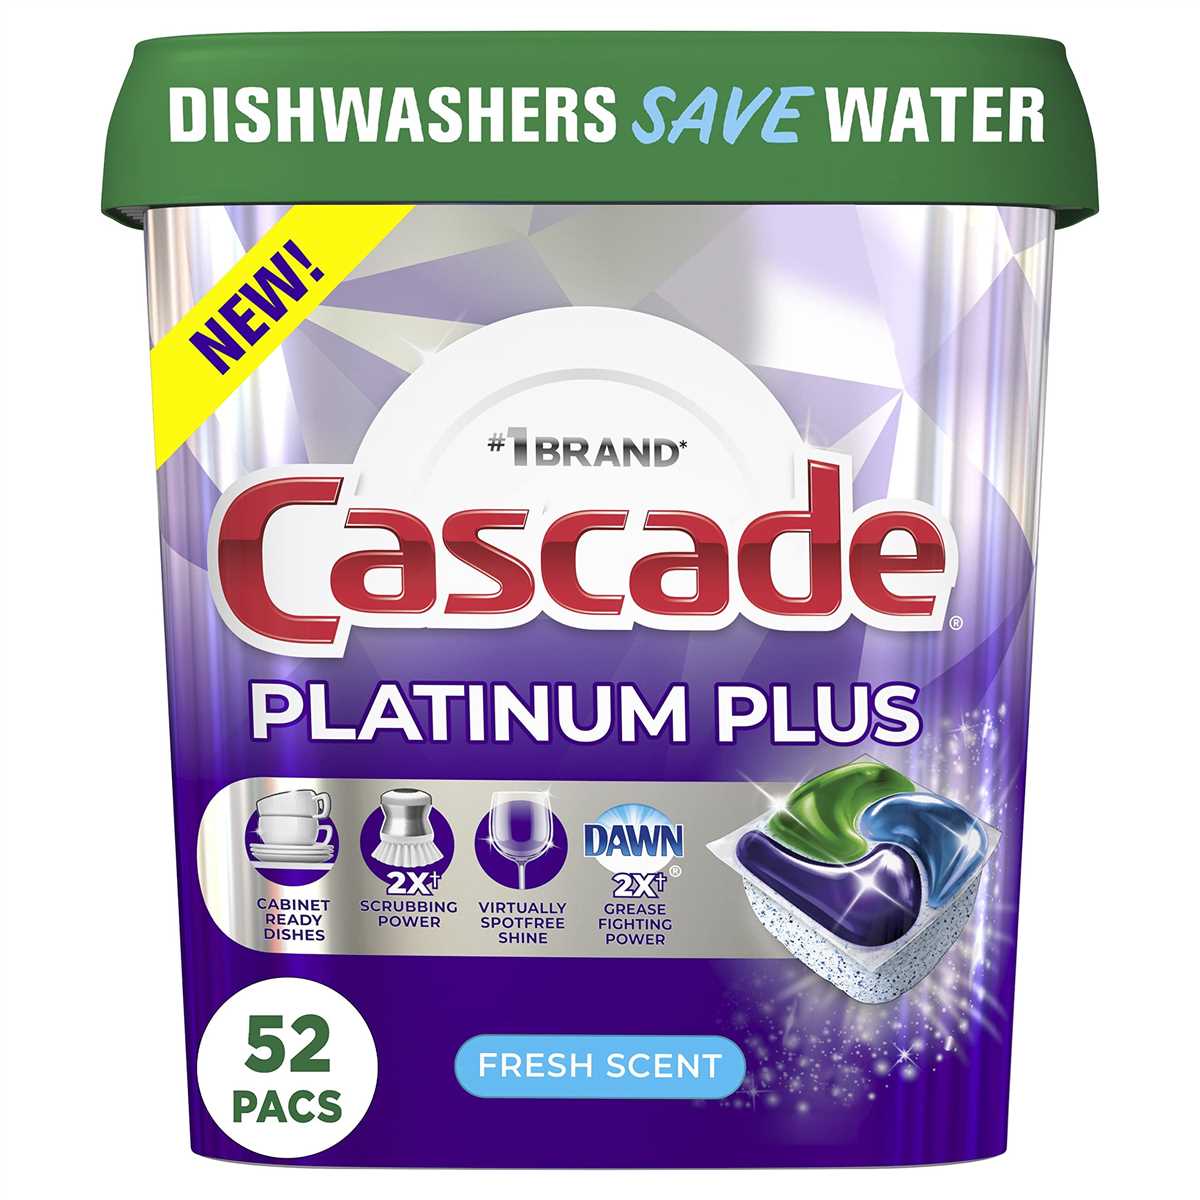 3. Place the fragrance-free dishwasher pod in the detergent dispenser: